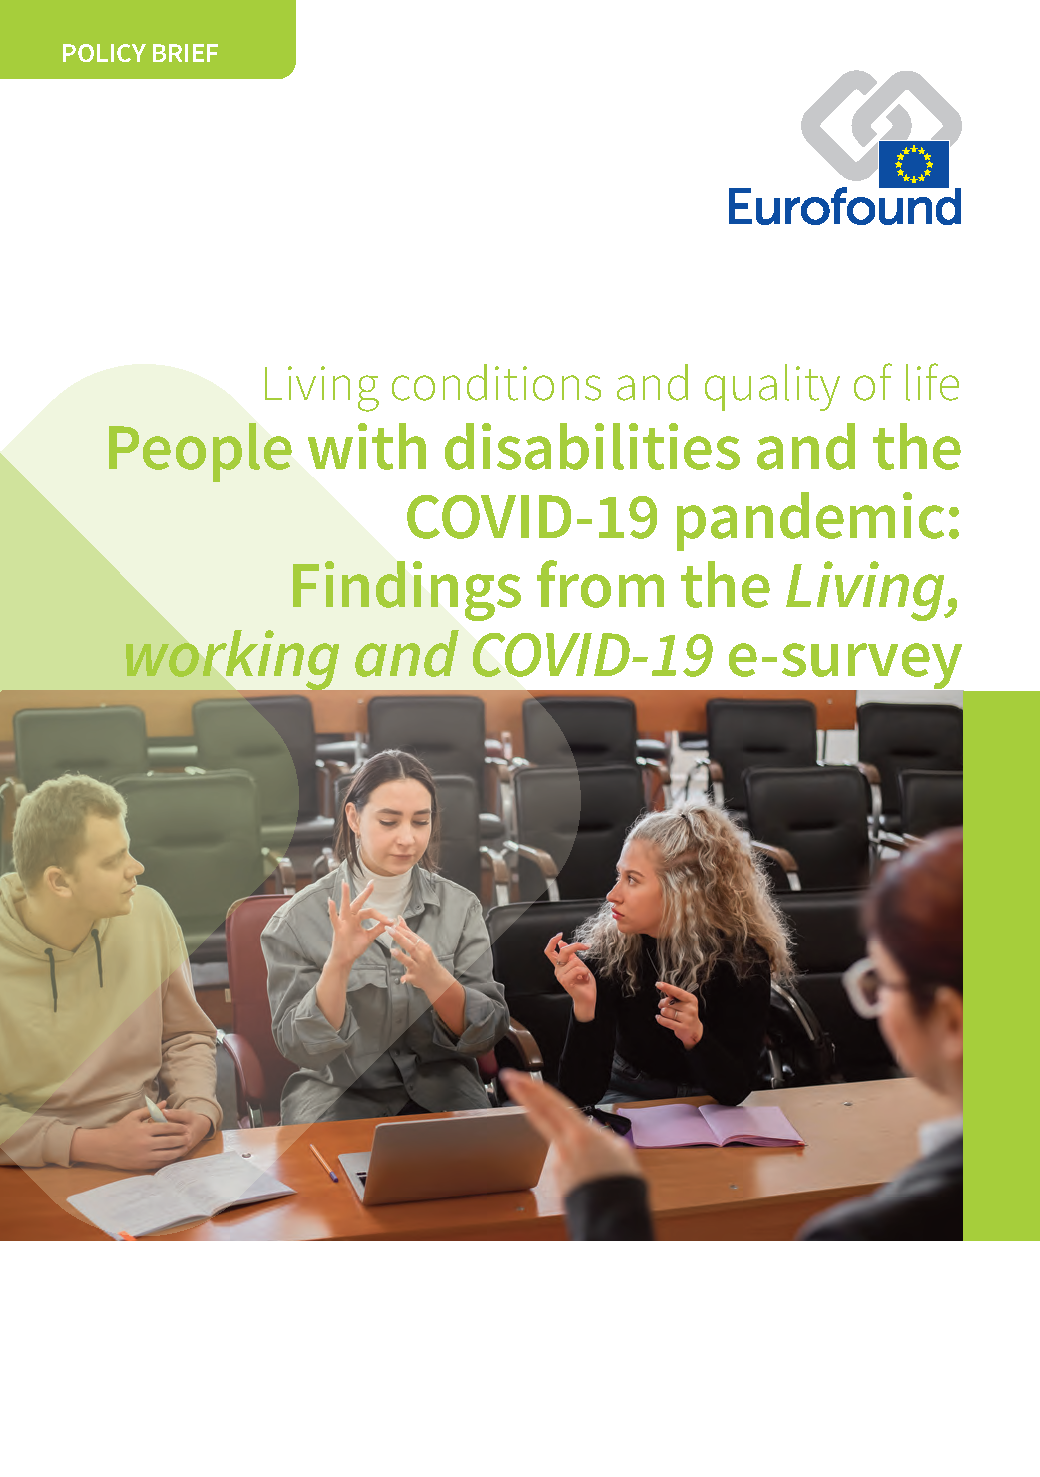 Cover image for Eurofound's policy brief entitled 'People with disabilities and the COVID-19 pandemic: Findings from the Living, working and COVID-19 e-survey'